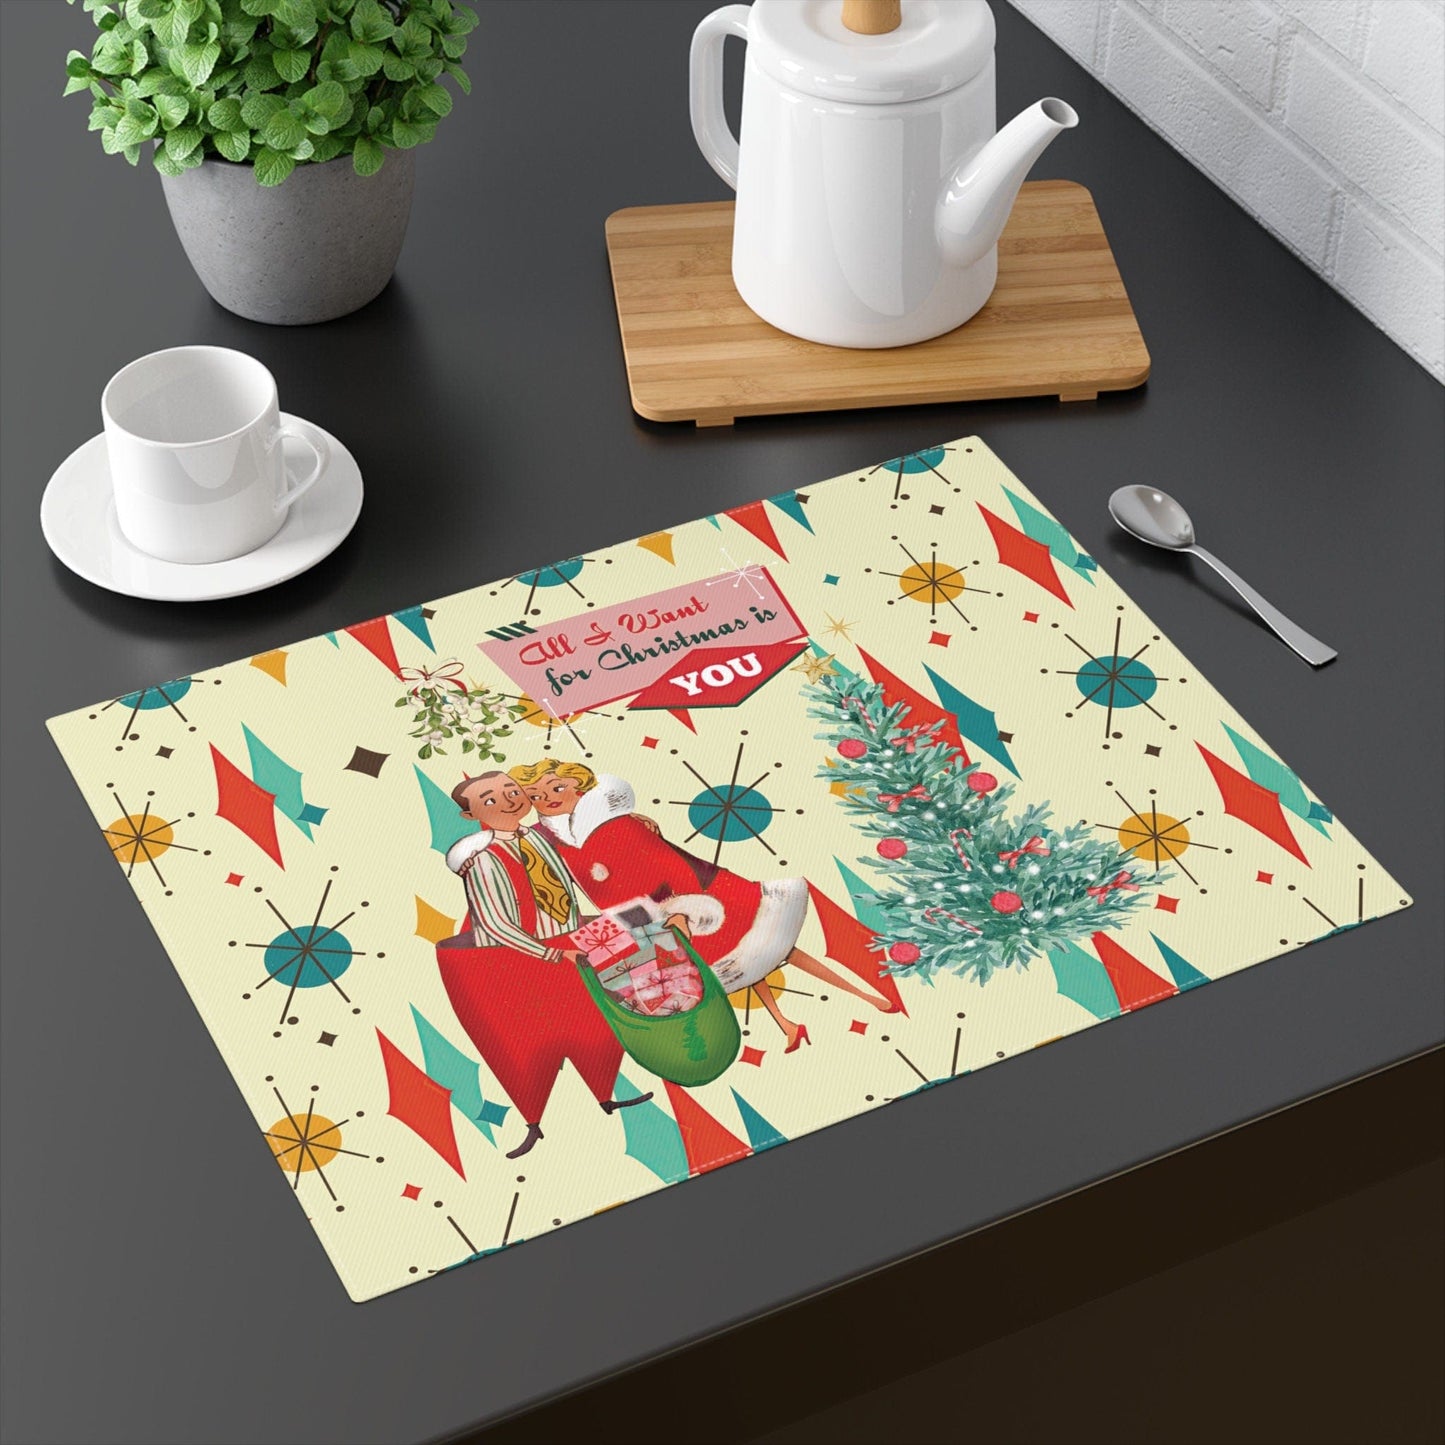 Kate McEnroe New York Retro Vintage 50s Franciscan Diamond Starburst Kitsch Christmas Card Art Placemat, Mid Century Modern Holiday Table Linen Placemats DPM-VIN-WOM-3